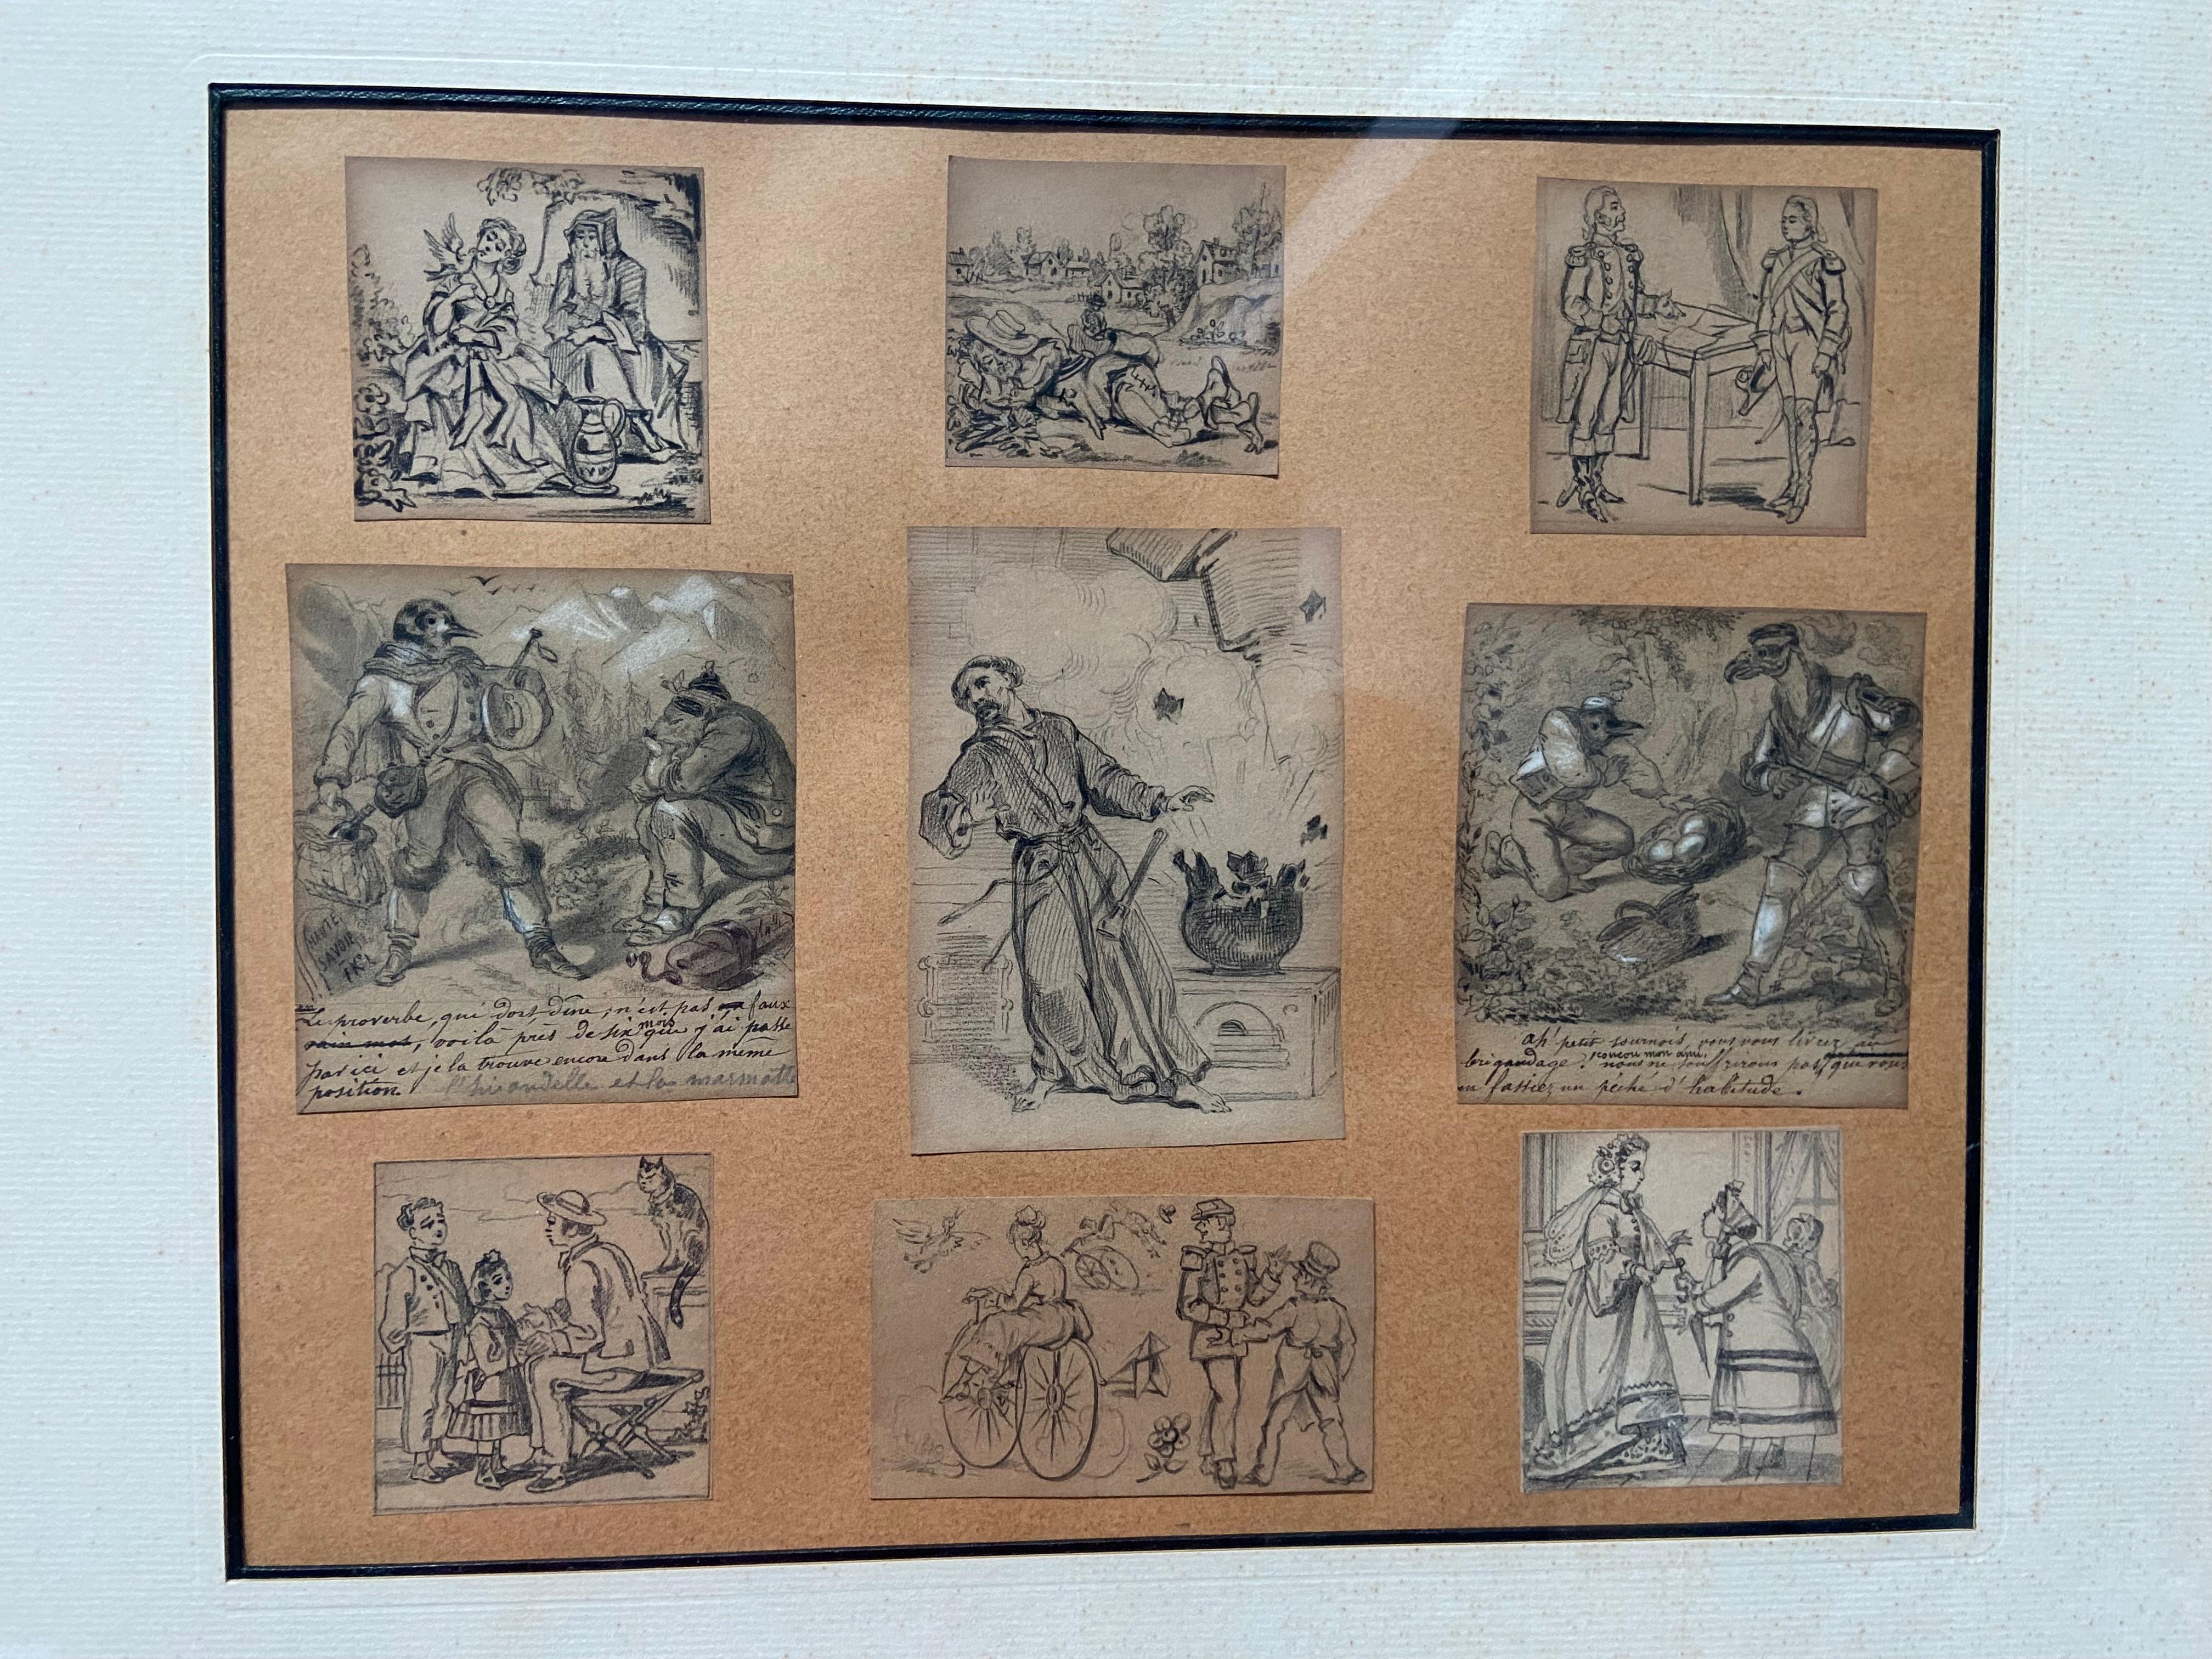 Unknown Figurative Art - French School 19th century, Set of nine humoristic drawings, pencil on paper